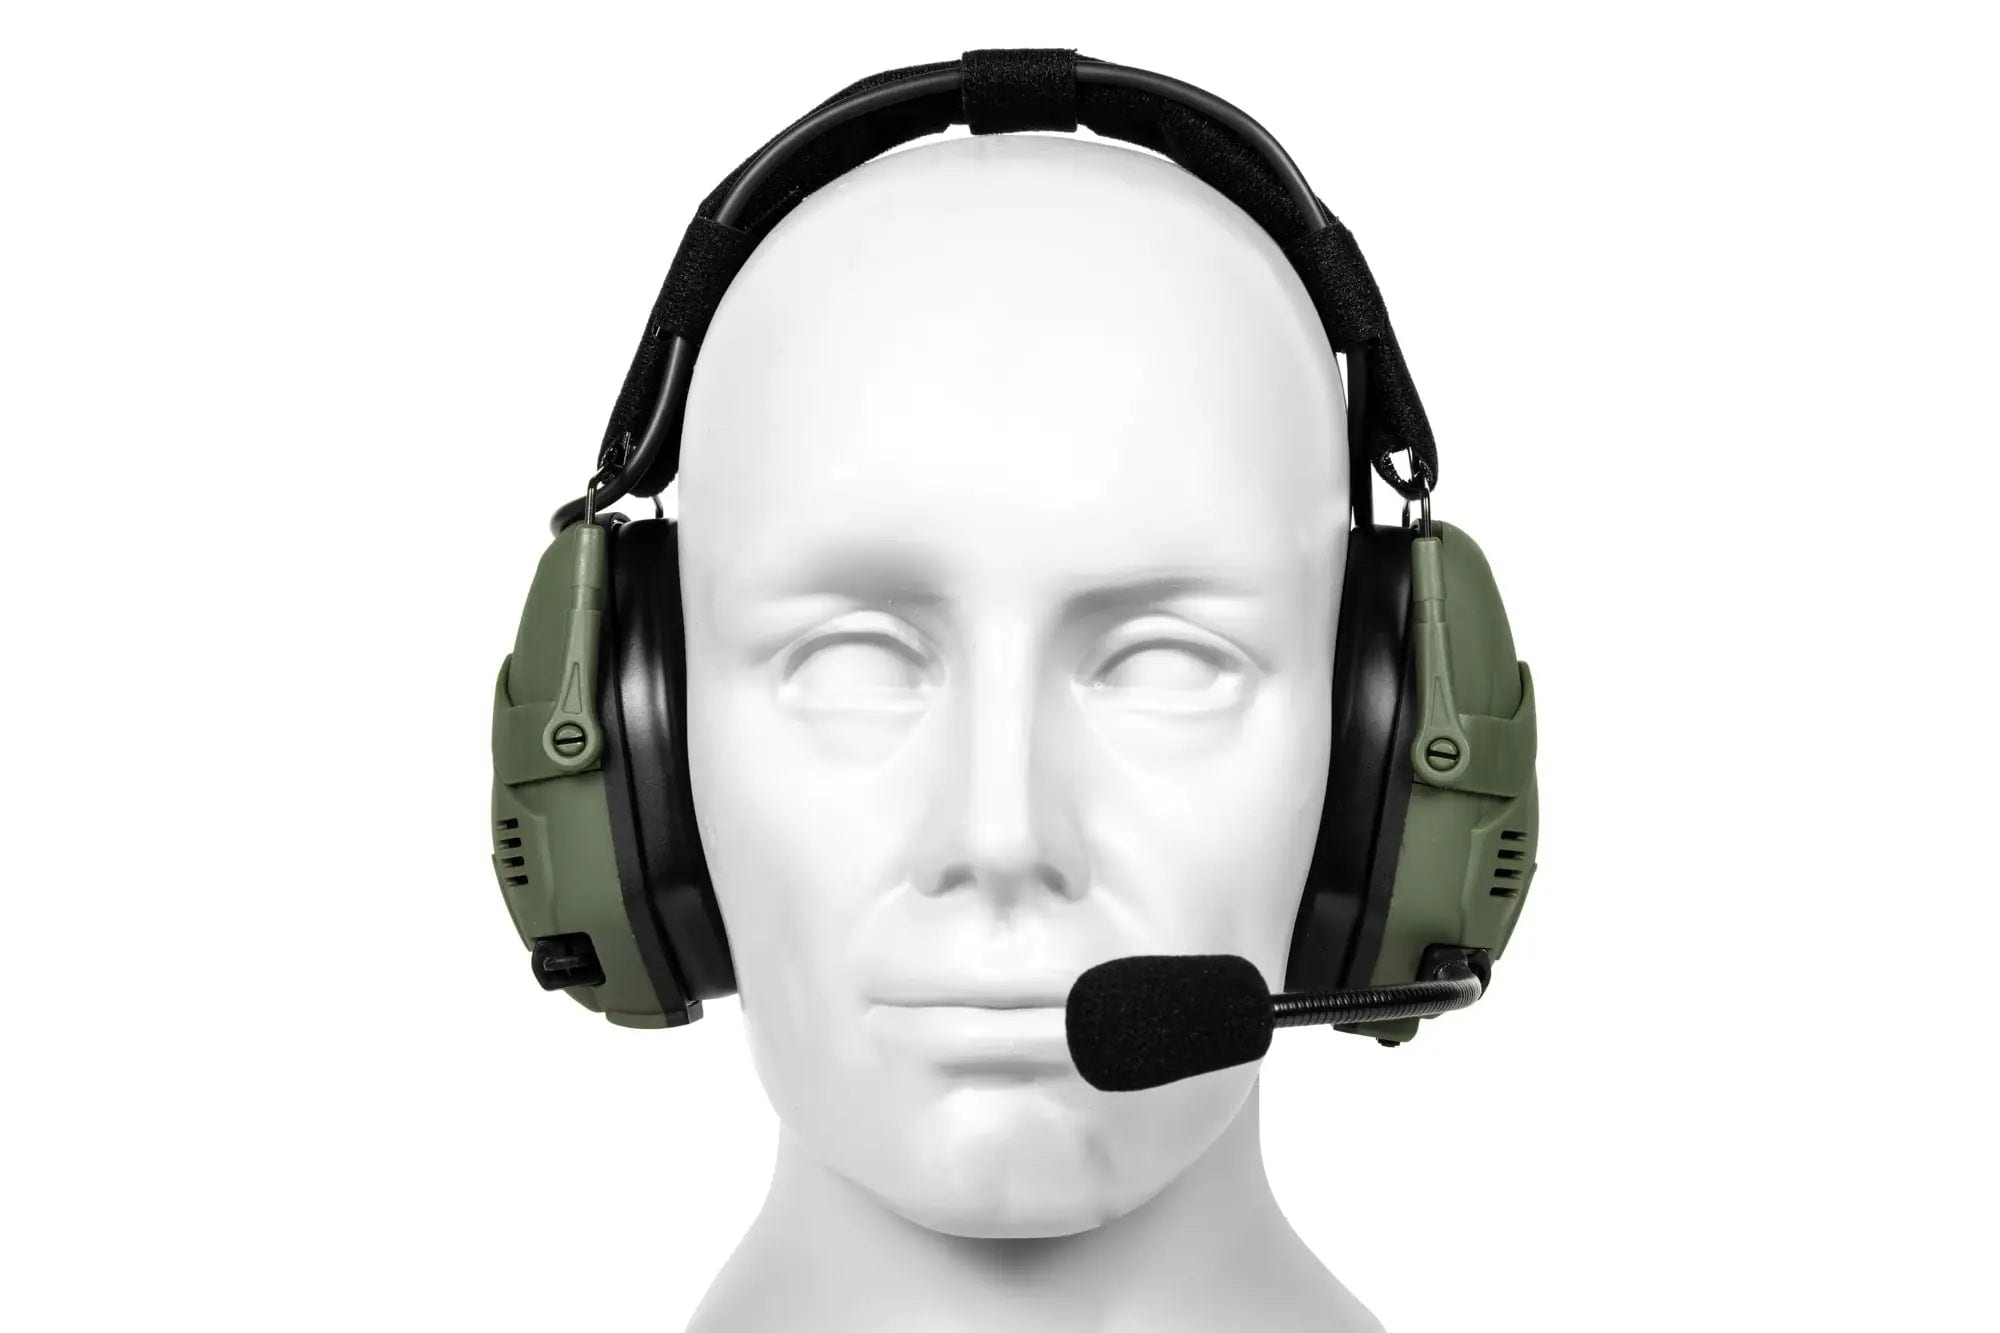 Taktisches aktives Bluetooth-Headset HD-16 - Olive